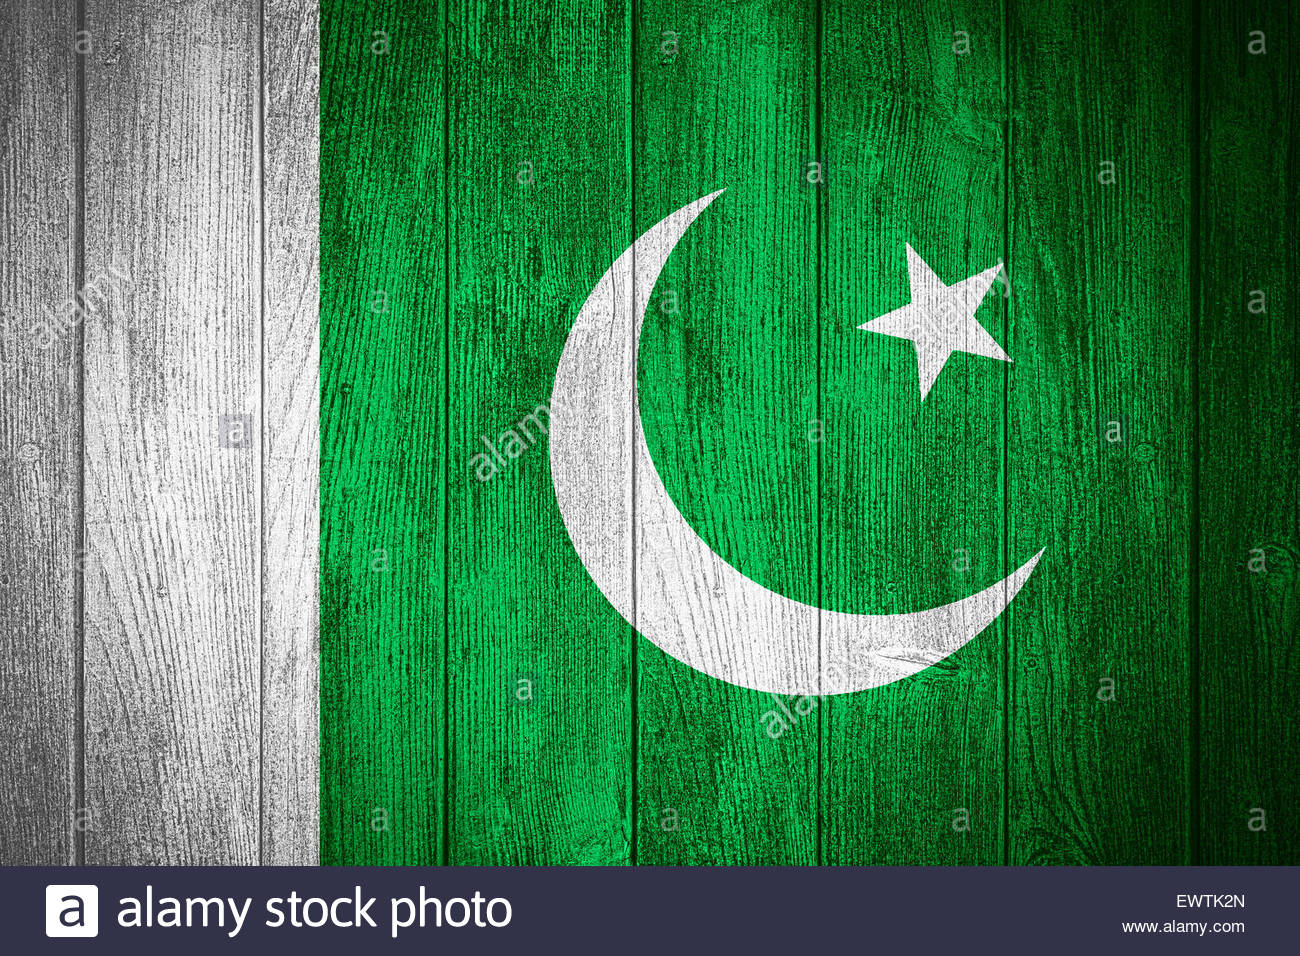 Pakistan Flag Or Pakistani Banner On Wooden Boards Background